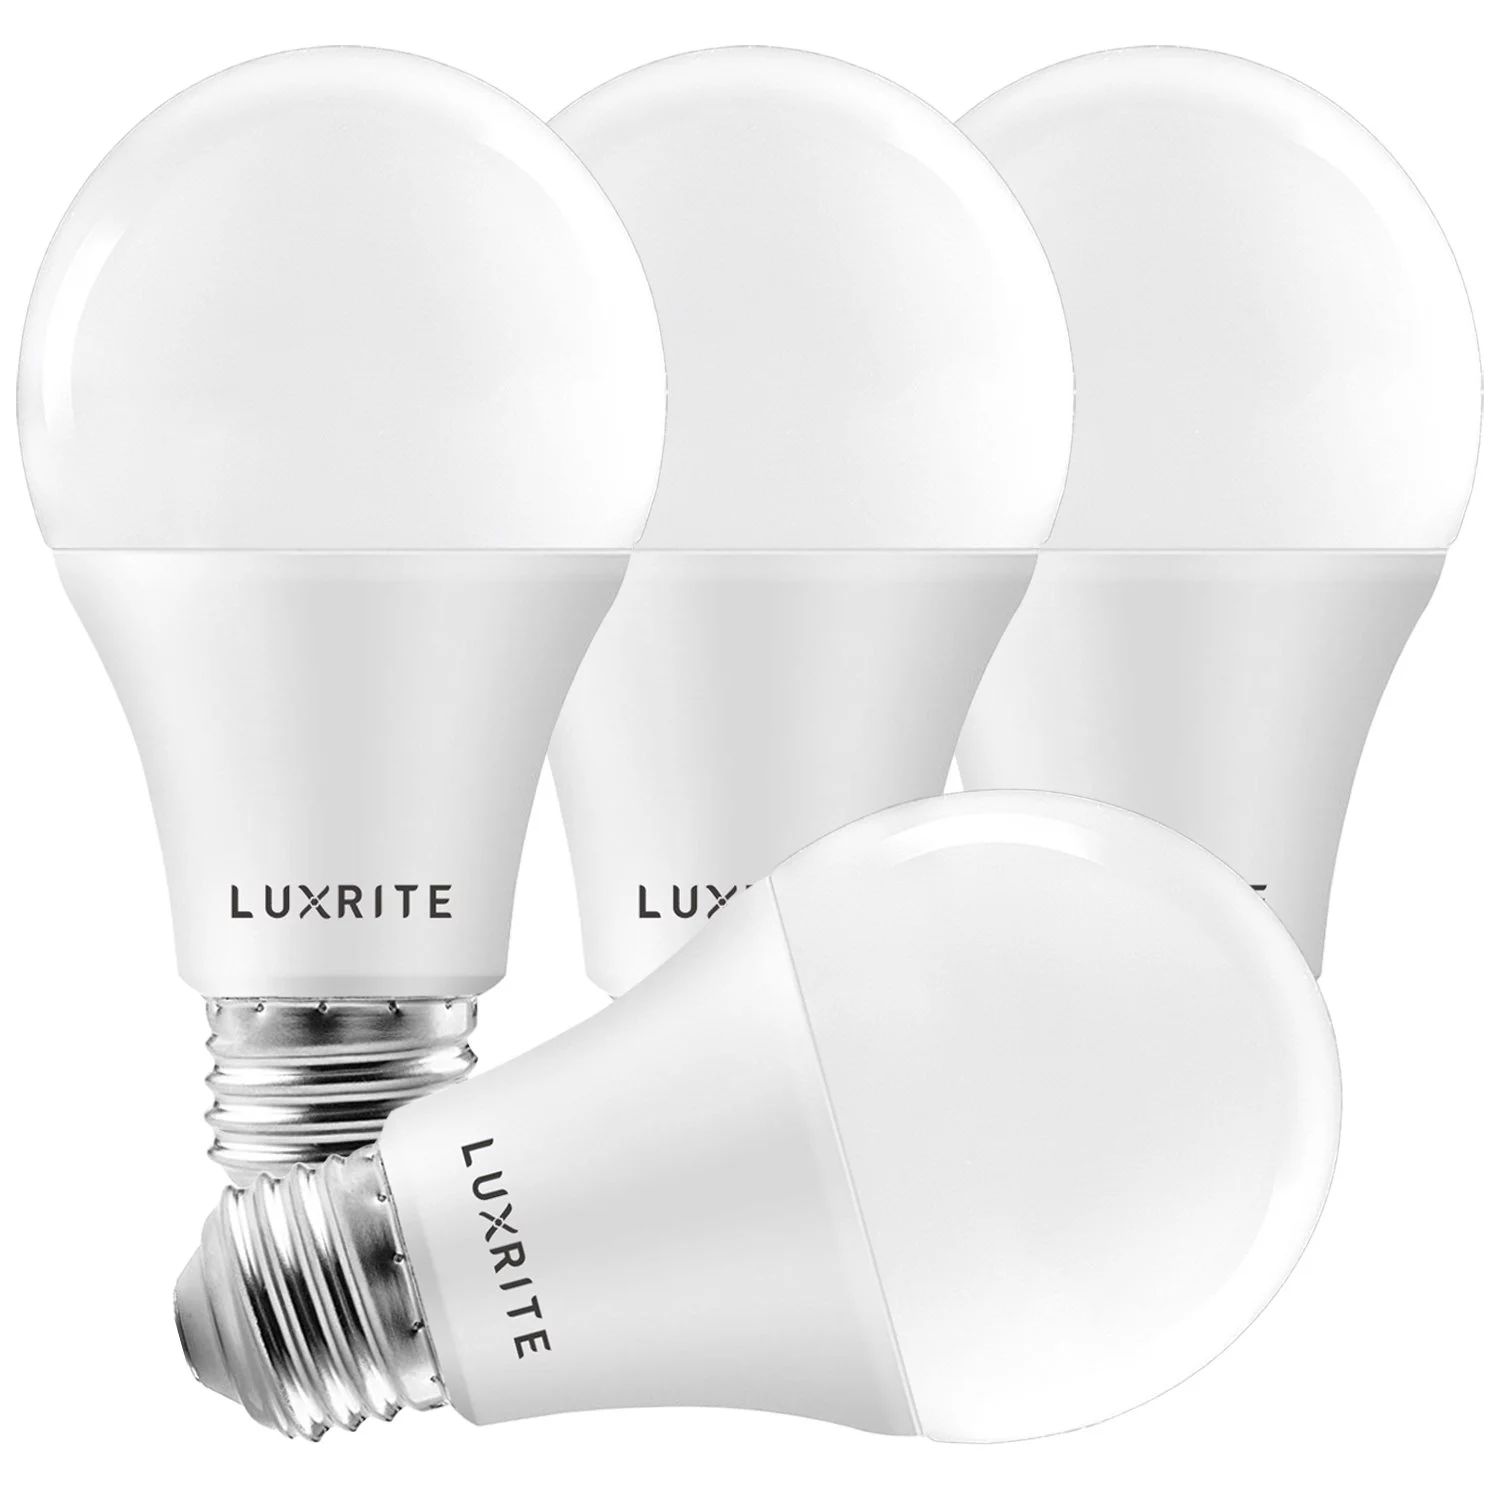 Luxrite A19 LED Light Bulb, Dimmable, 3500K Natural White, 1600 Lumens, Enclosed Fixture Rated, 1... | Walmart (US)